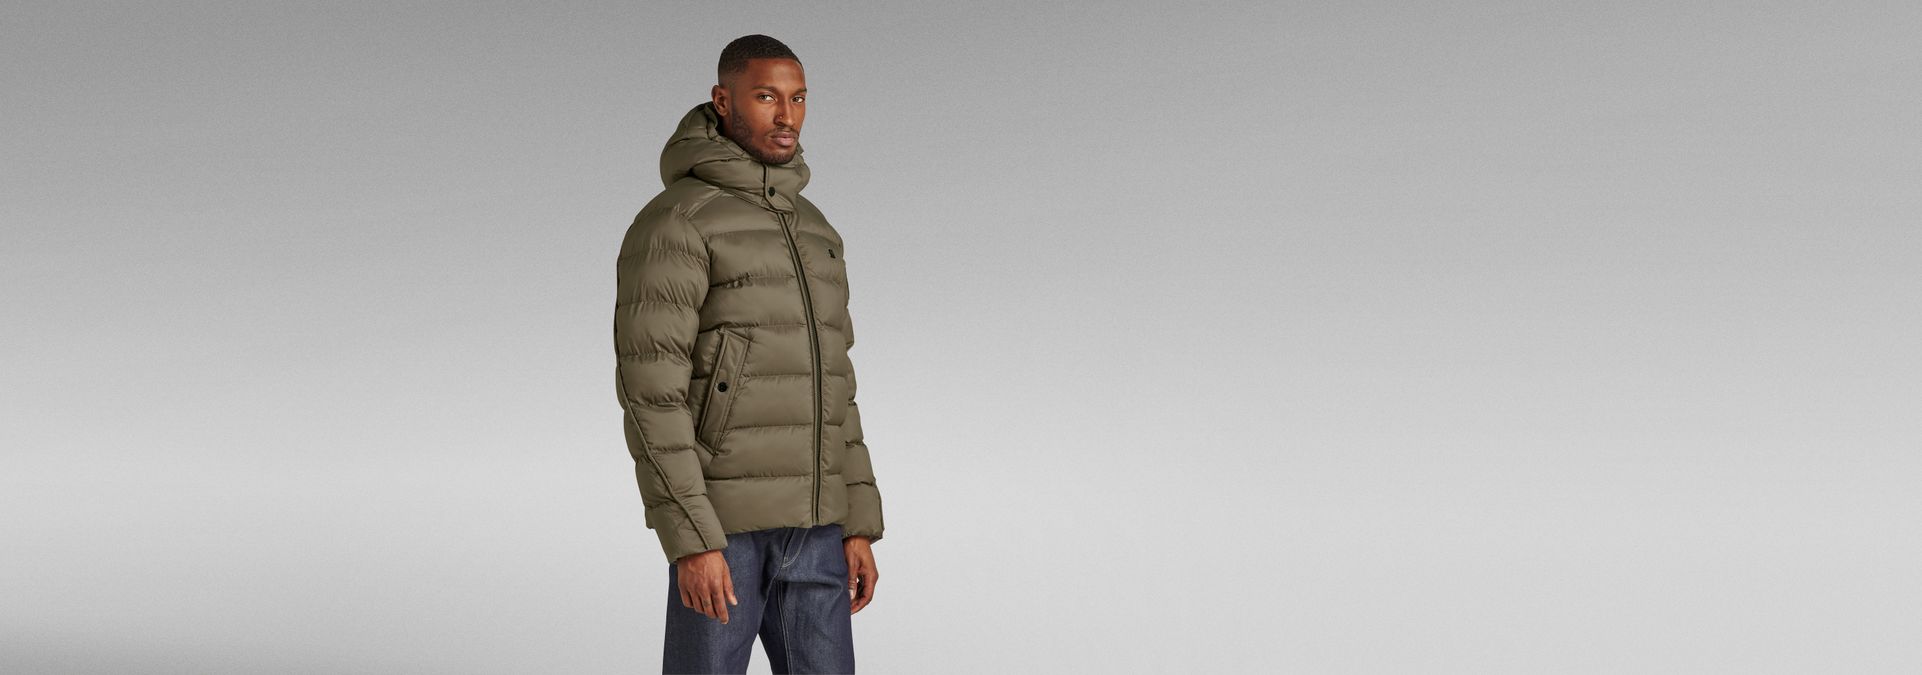 G-Whistler Padded Hooded Jacket | Brown G-Star RAW®